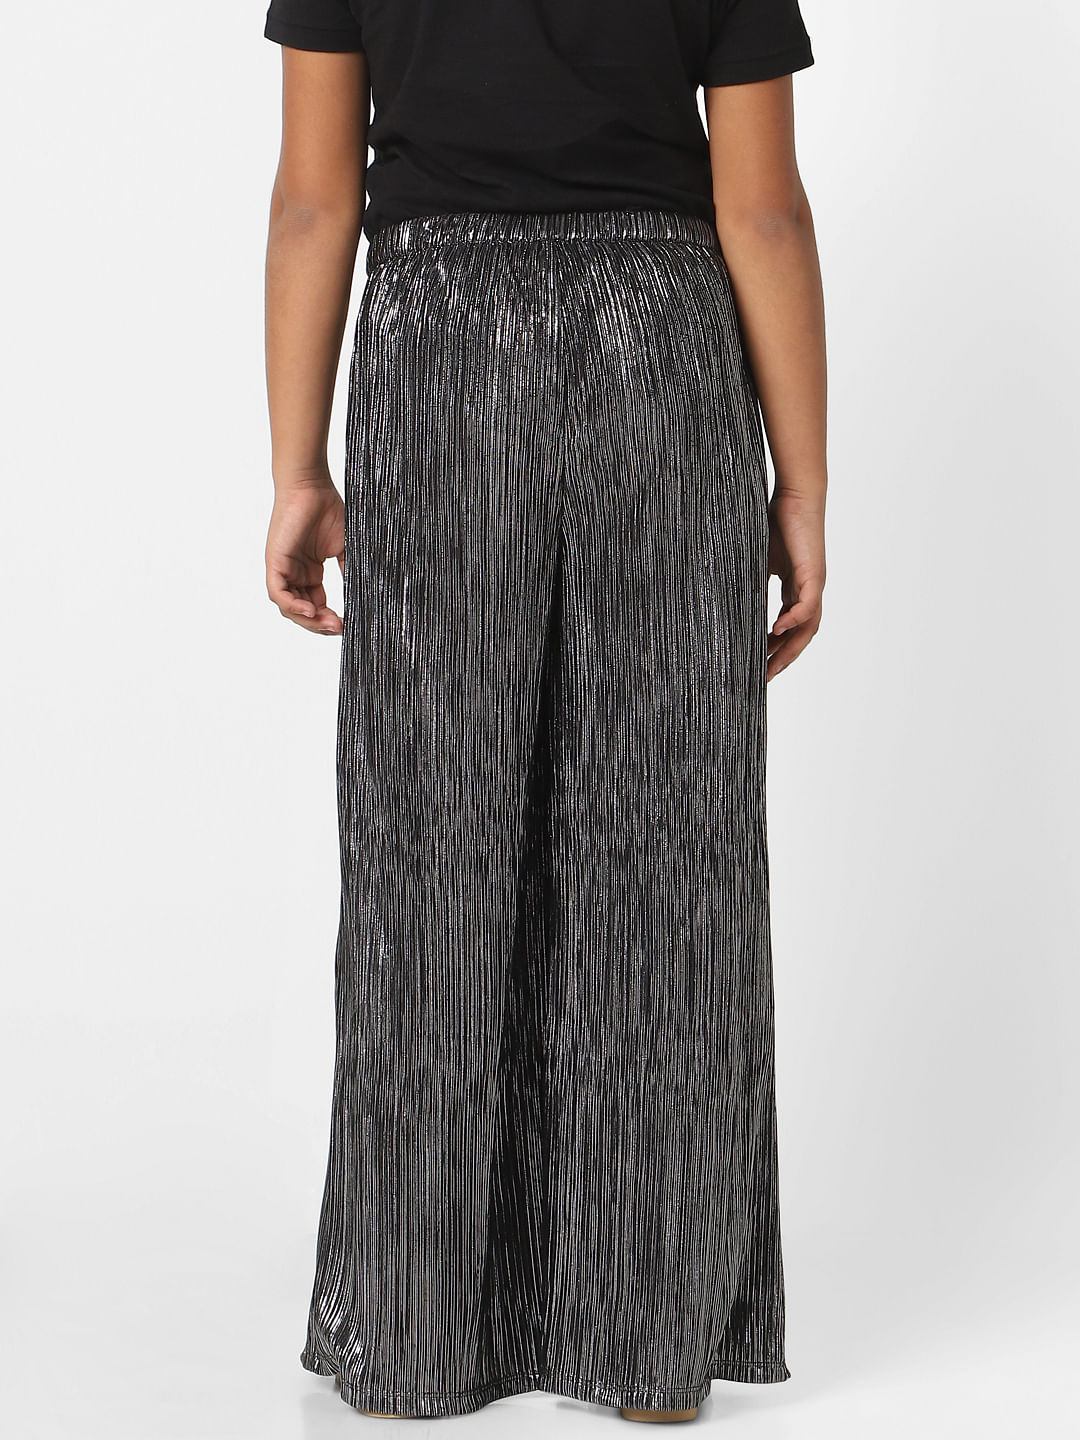 190 Black Palazzo Pants Stock Photos Pictures  RoyaltyFree Images   iStock